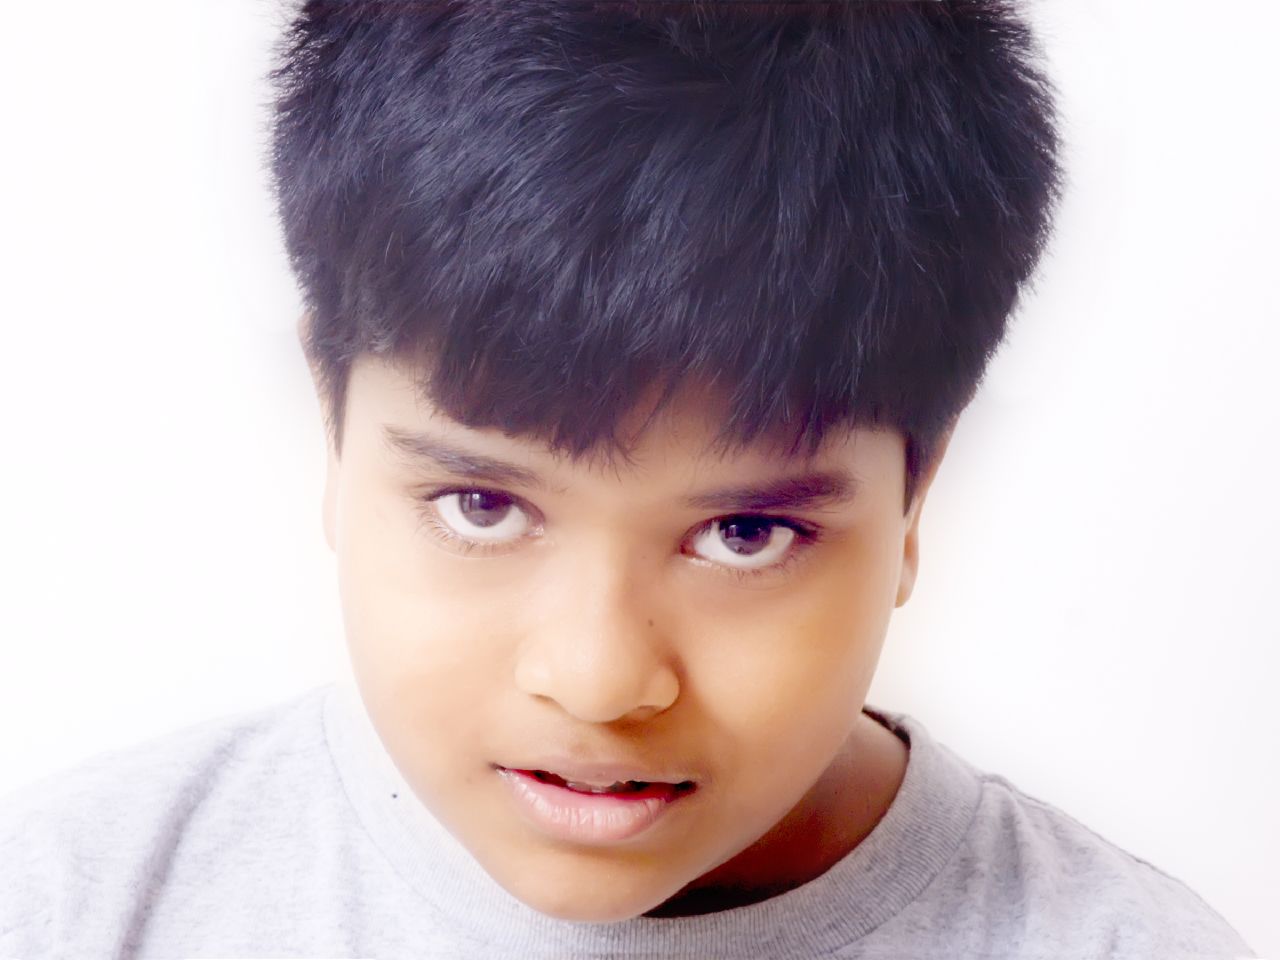 a boy with a short black hair is looking at the camera